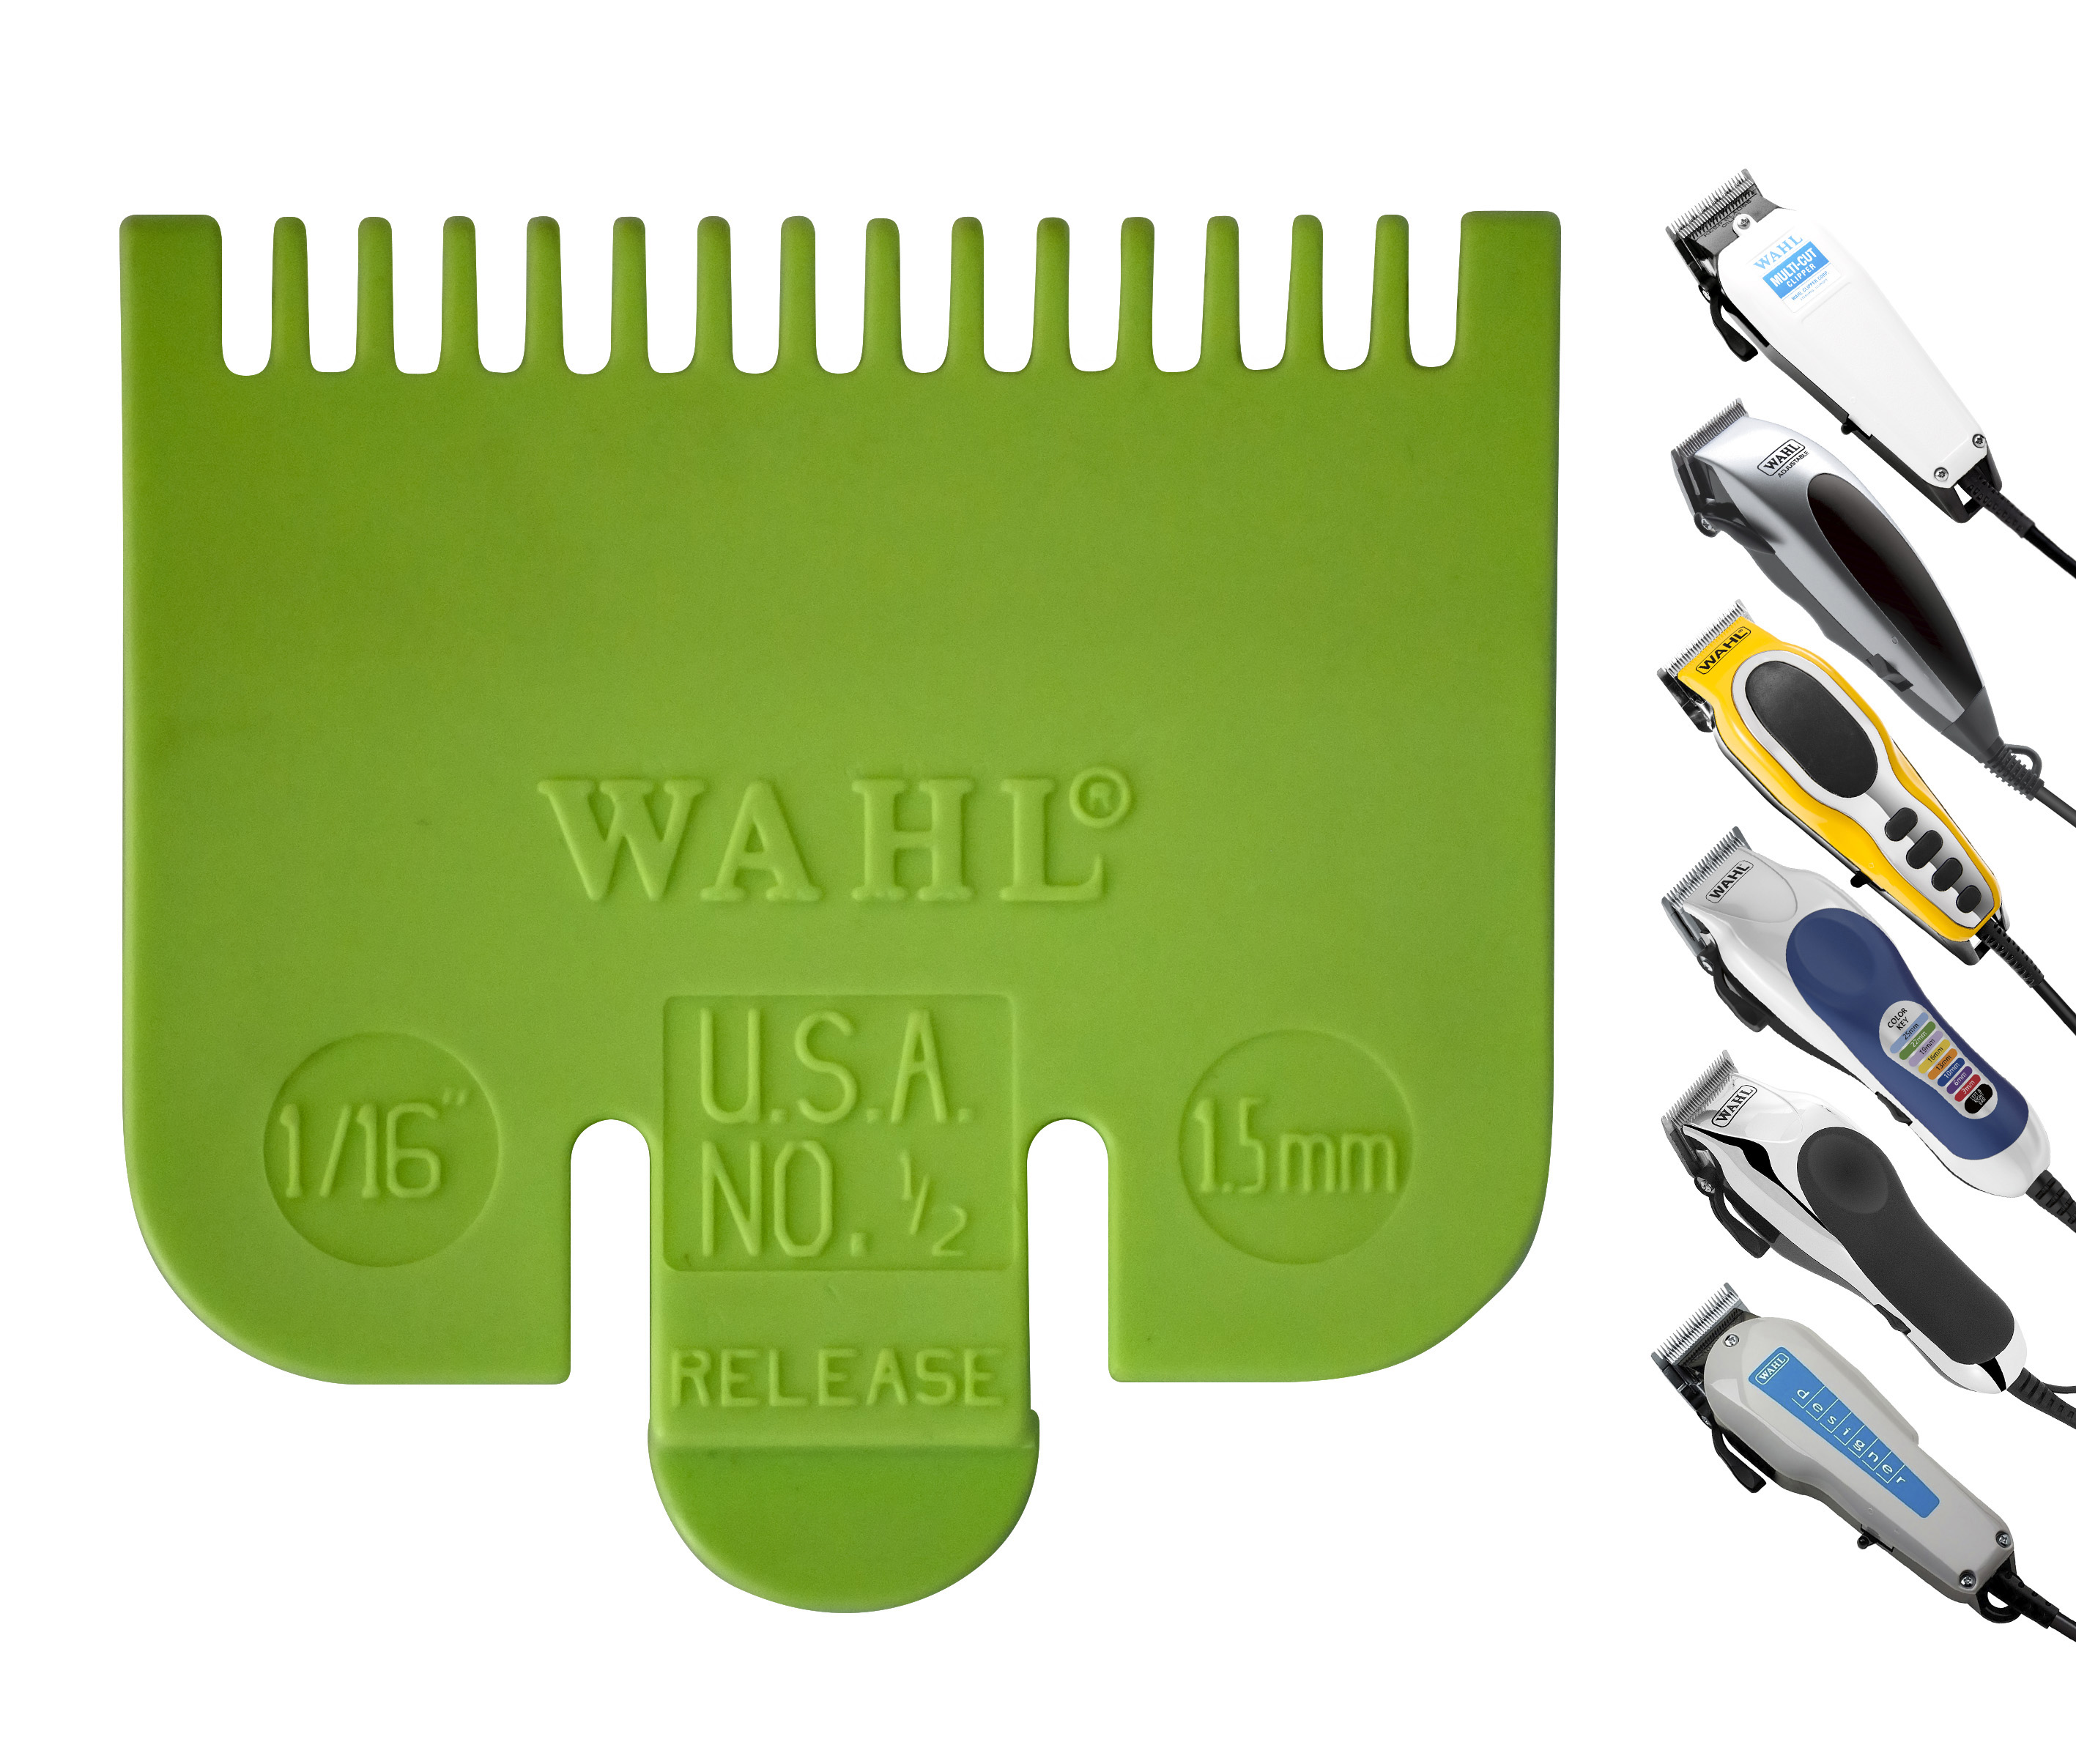  Size Cutting Guide | Wahl Global